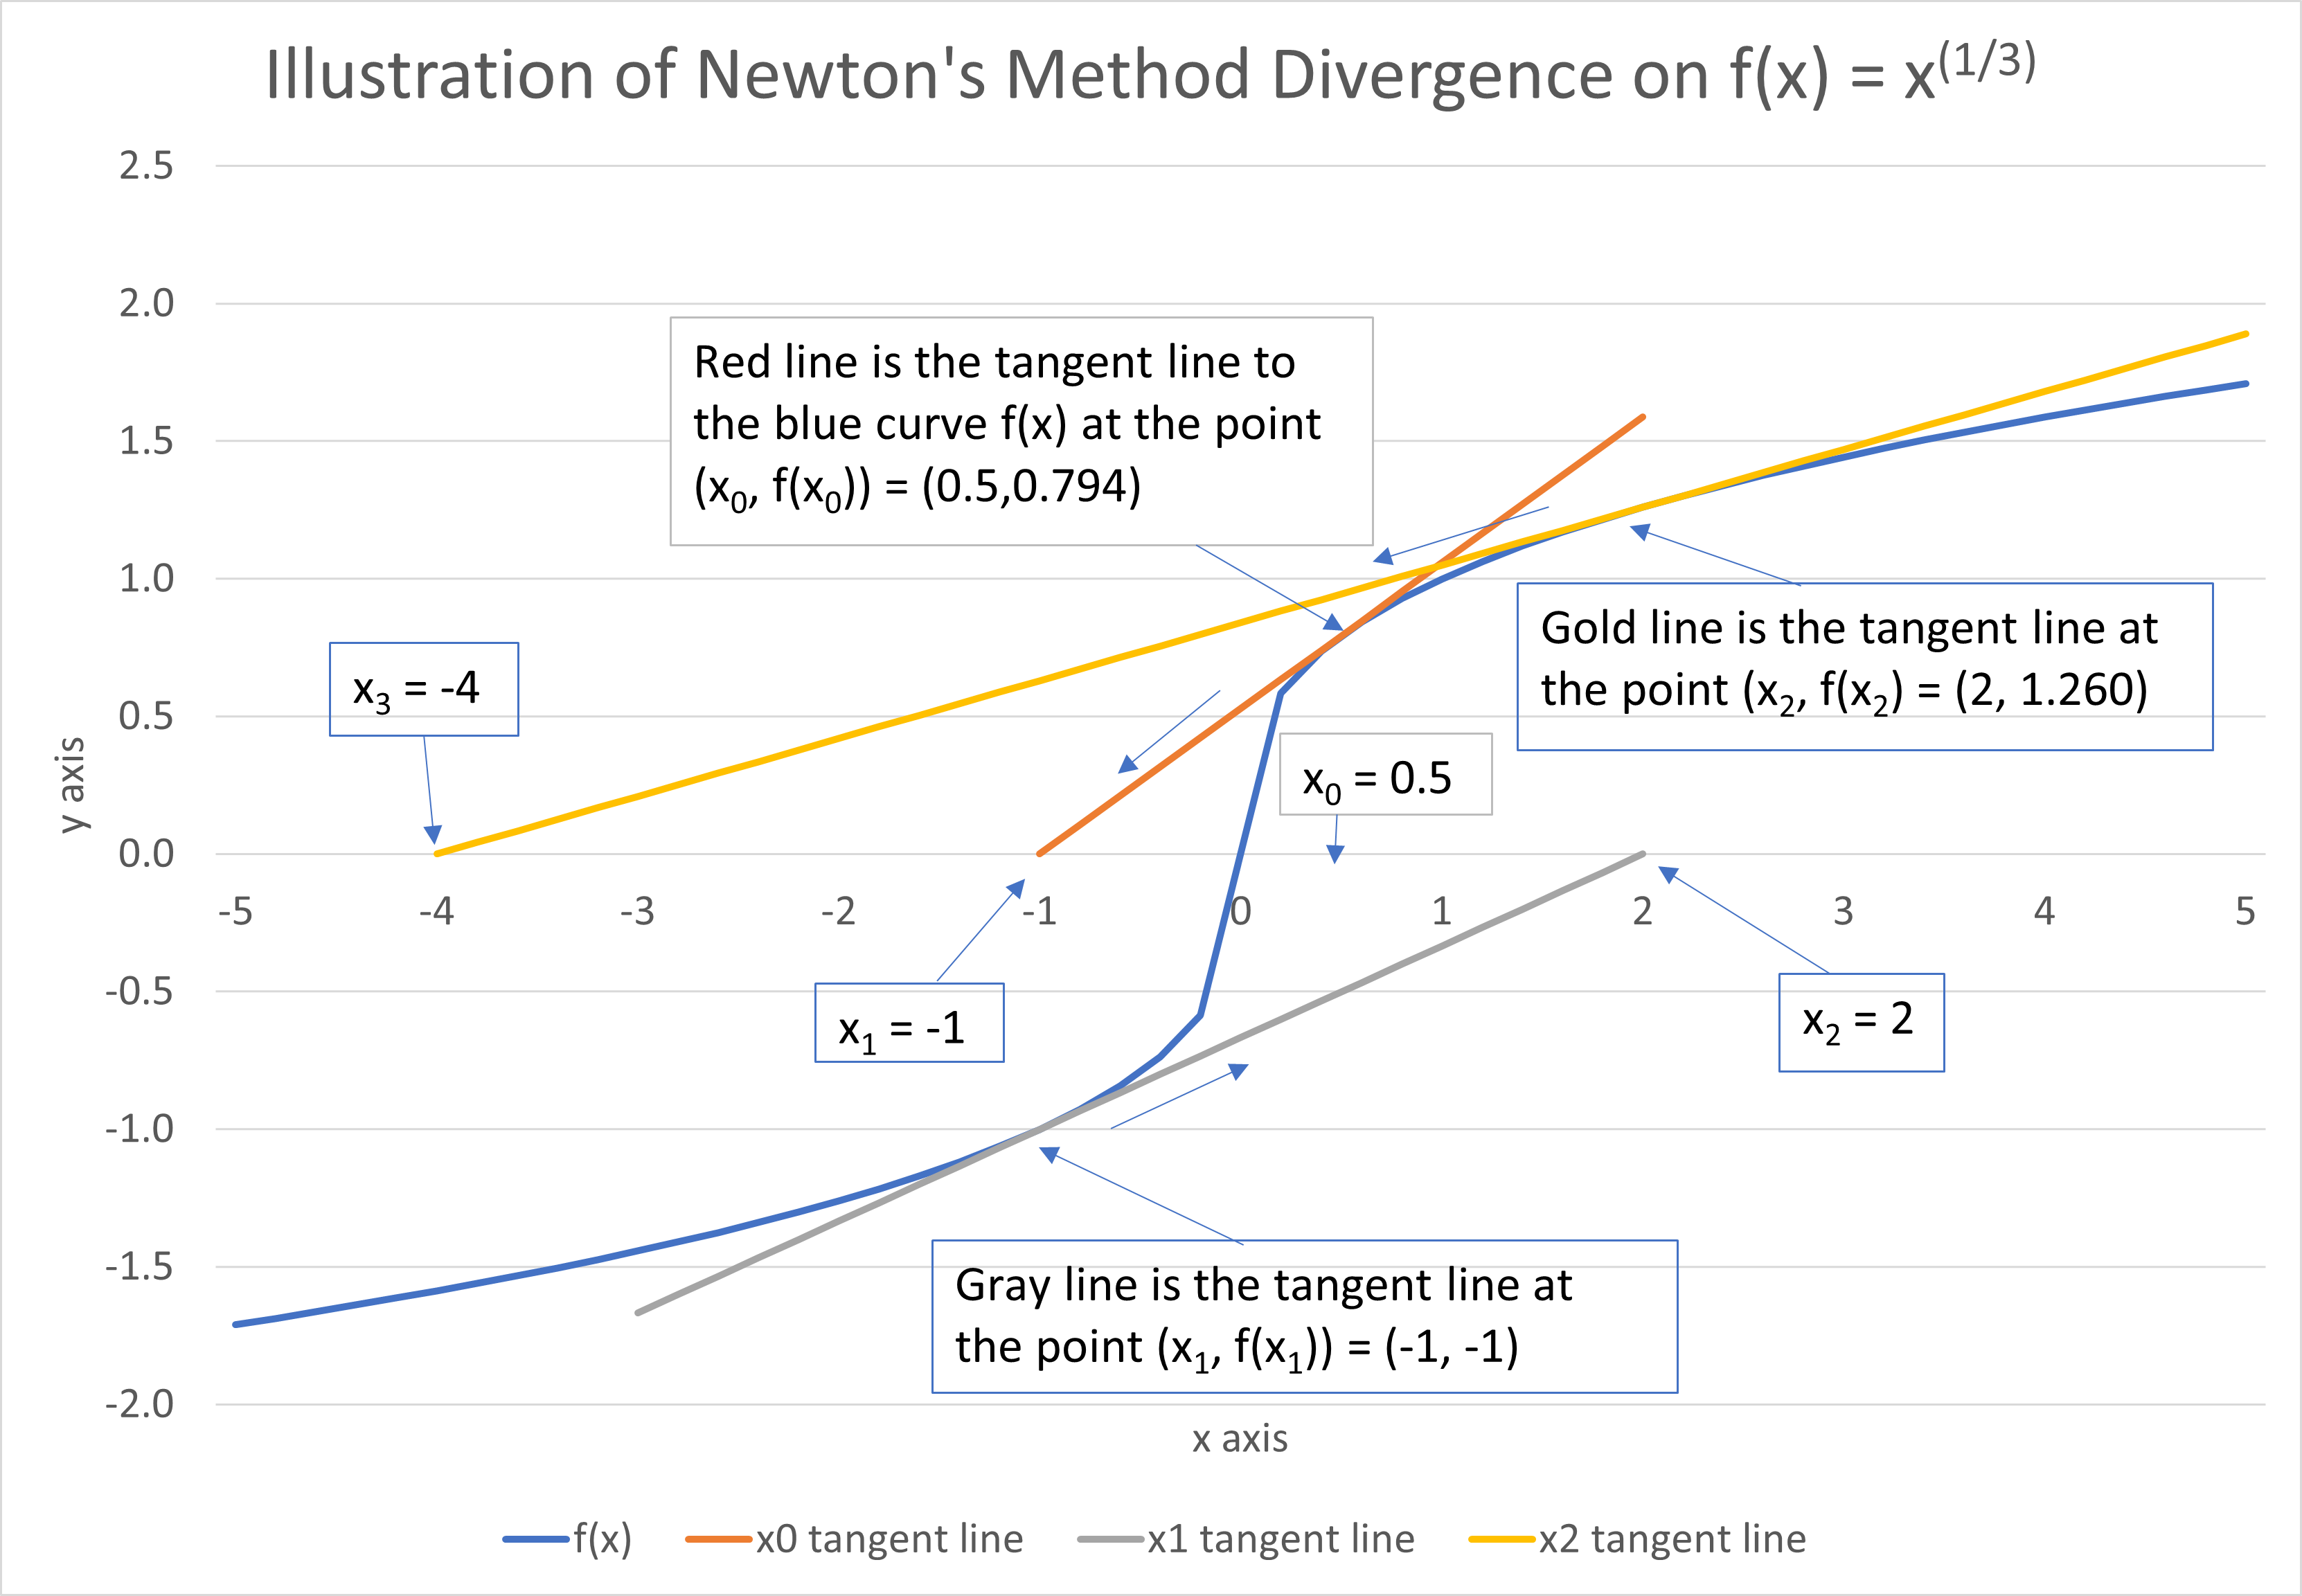 Graph showing divergence of Newton's method for f(x) = x^(1/3)